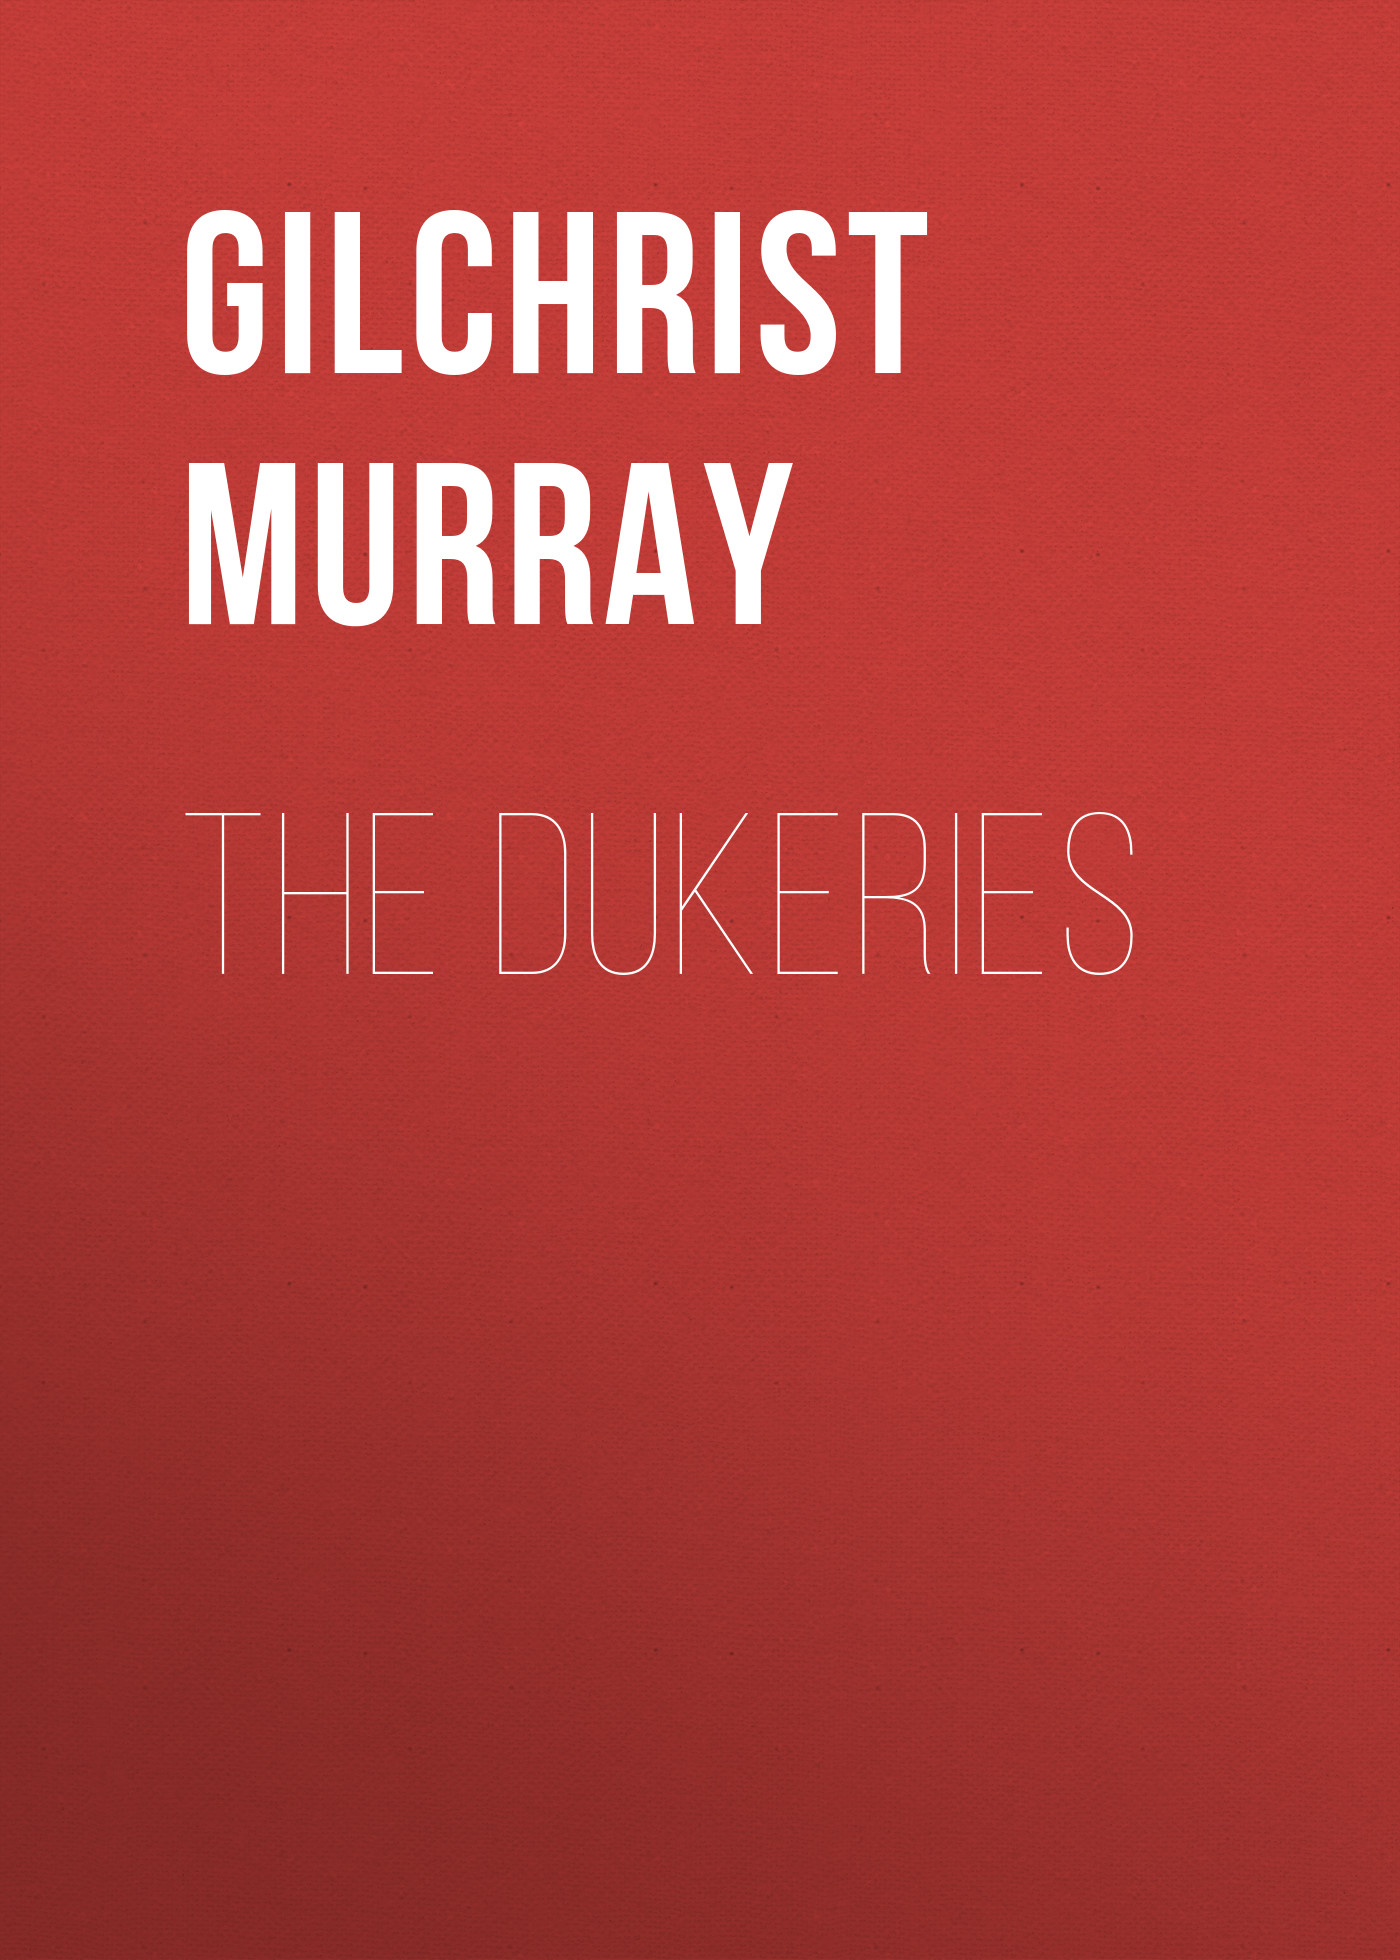 Gilchrist Murray The Dukeries